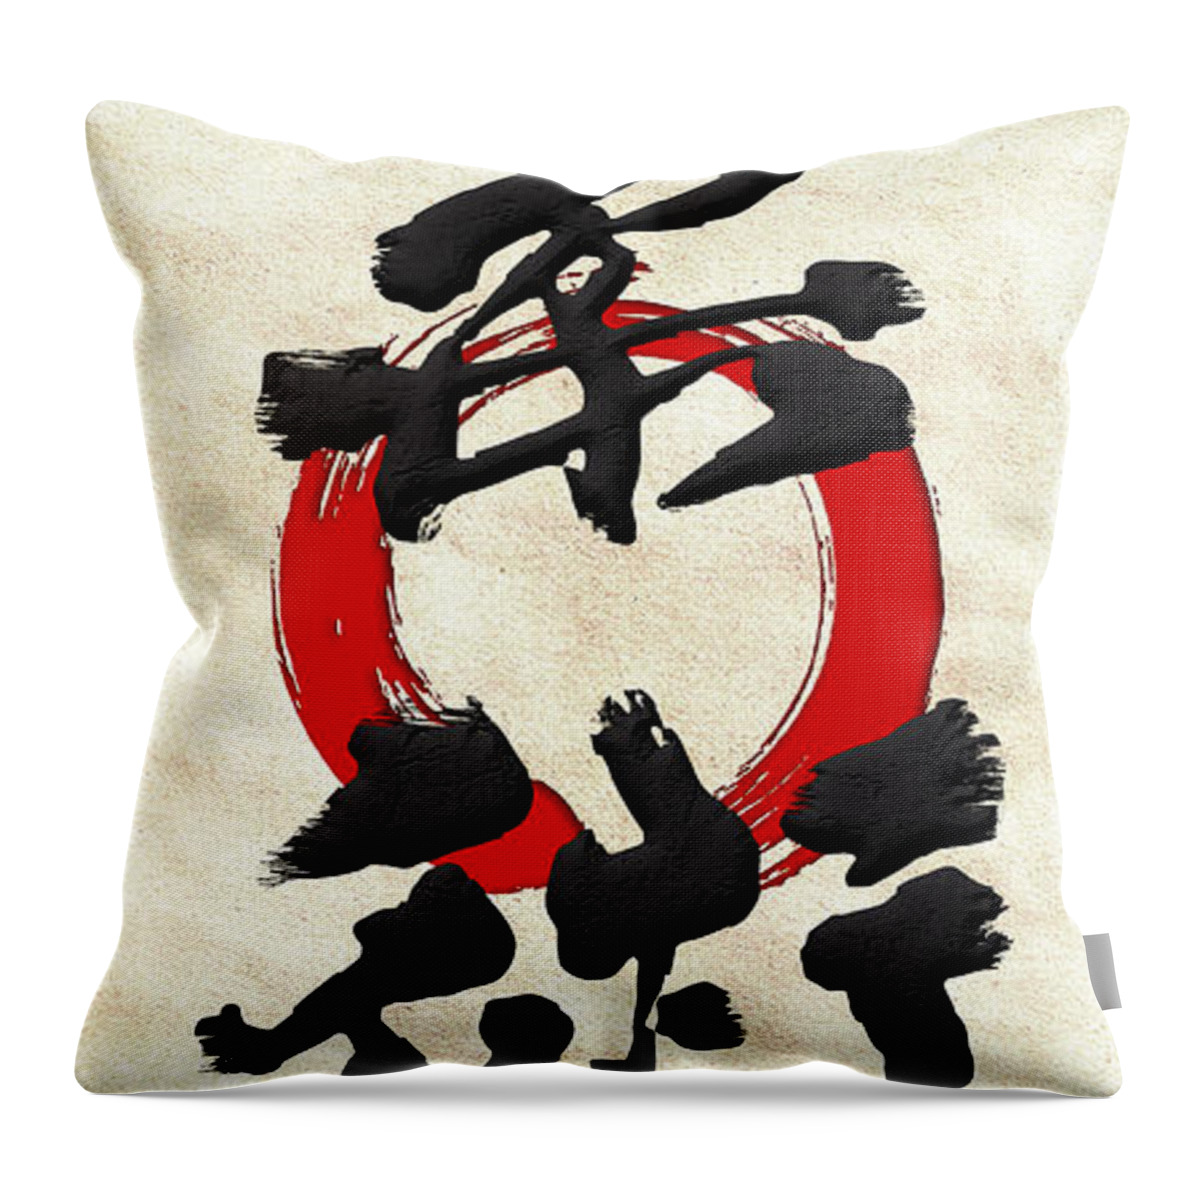 japanese Calligraphy By Serge Averbukh Throw Pillow featuring the photograph Japanese Kanji Calligraphy - Jujutsu #1 by Serge Averbukh